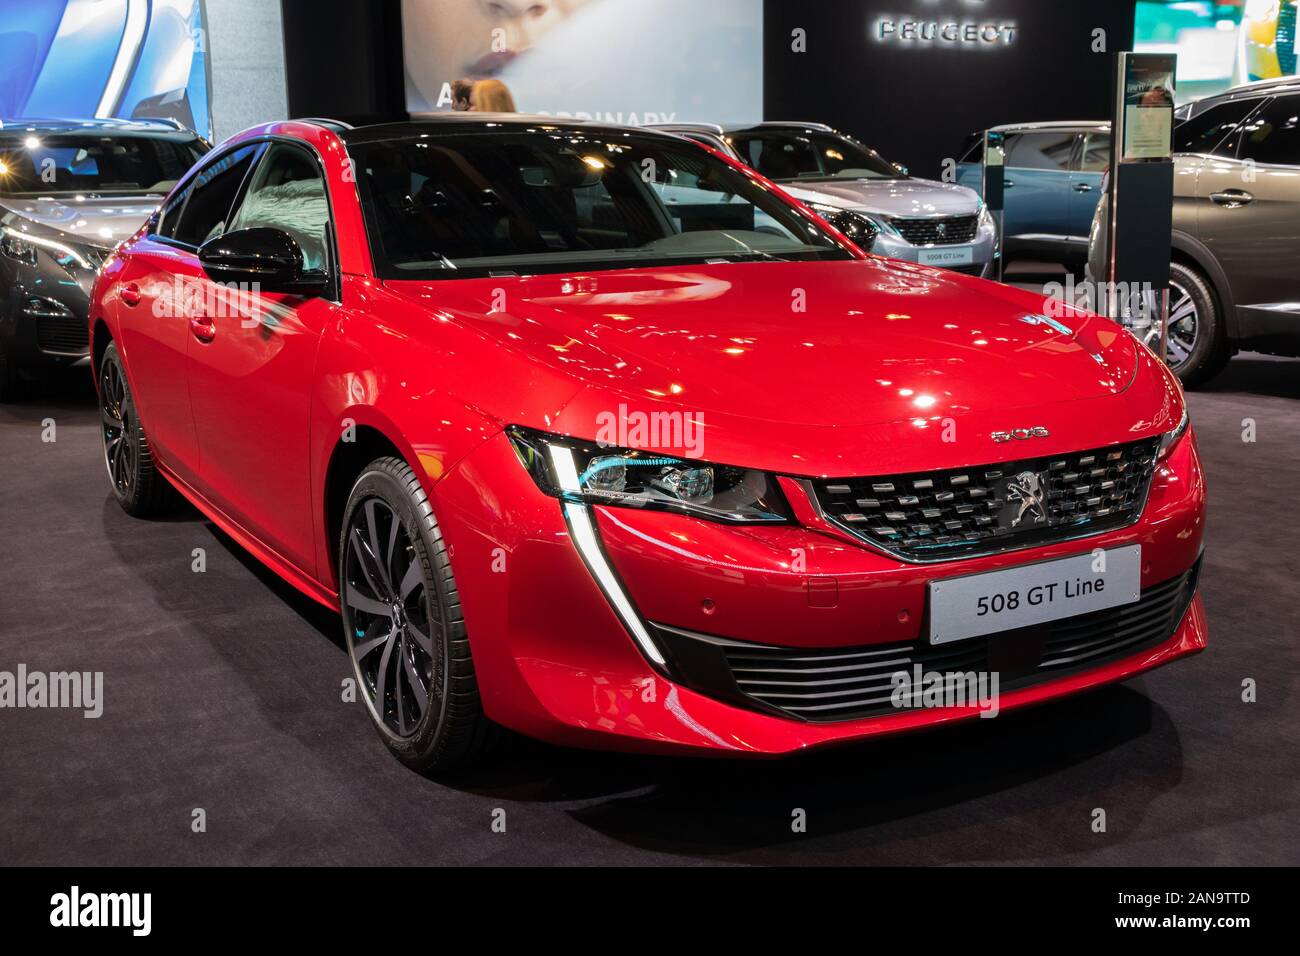 BRUSSELS - JAN 9, 2020: New 2020 Peugeot 508 GT Fastback car model model presented at the Brussels Autosalon 2020 Motor Show. Stock Photo